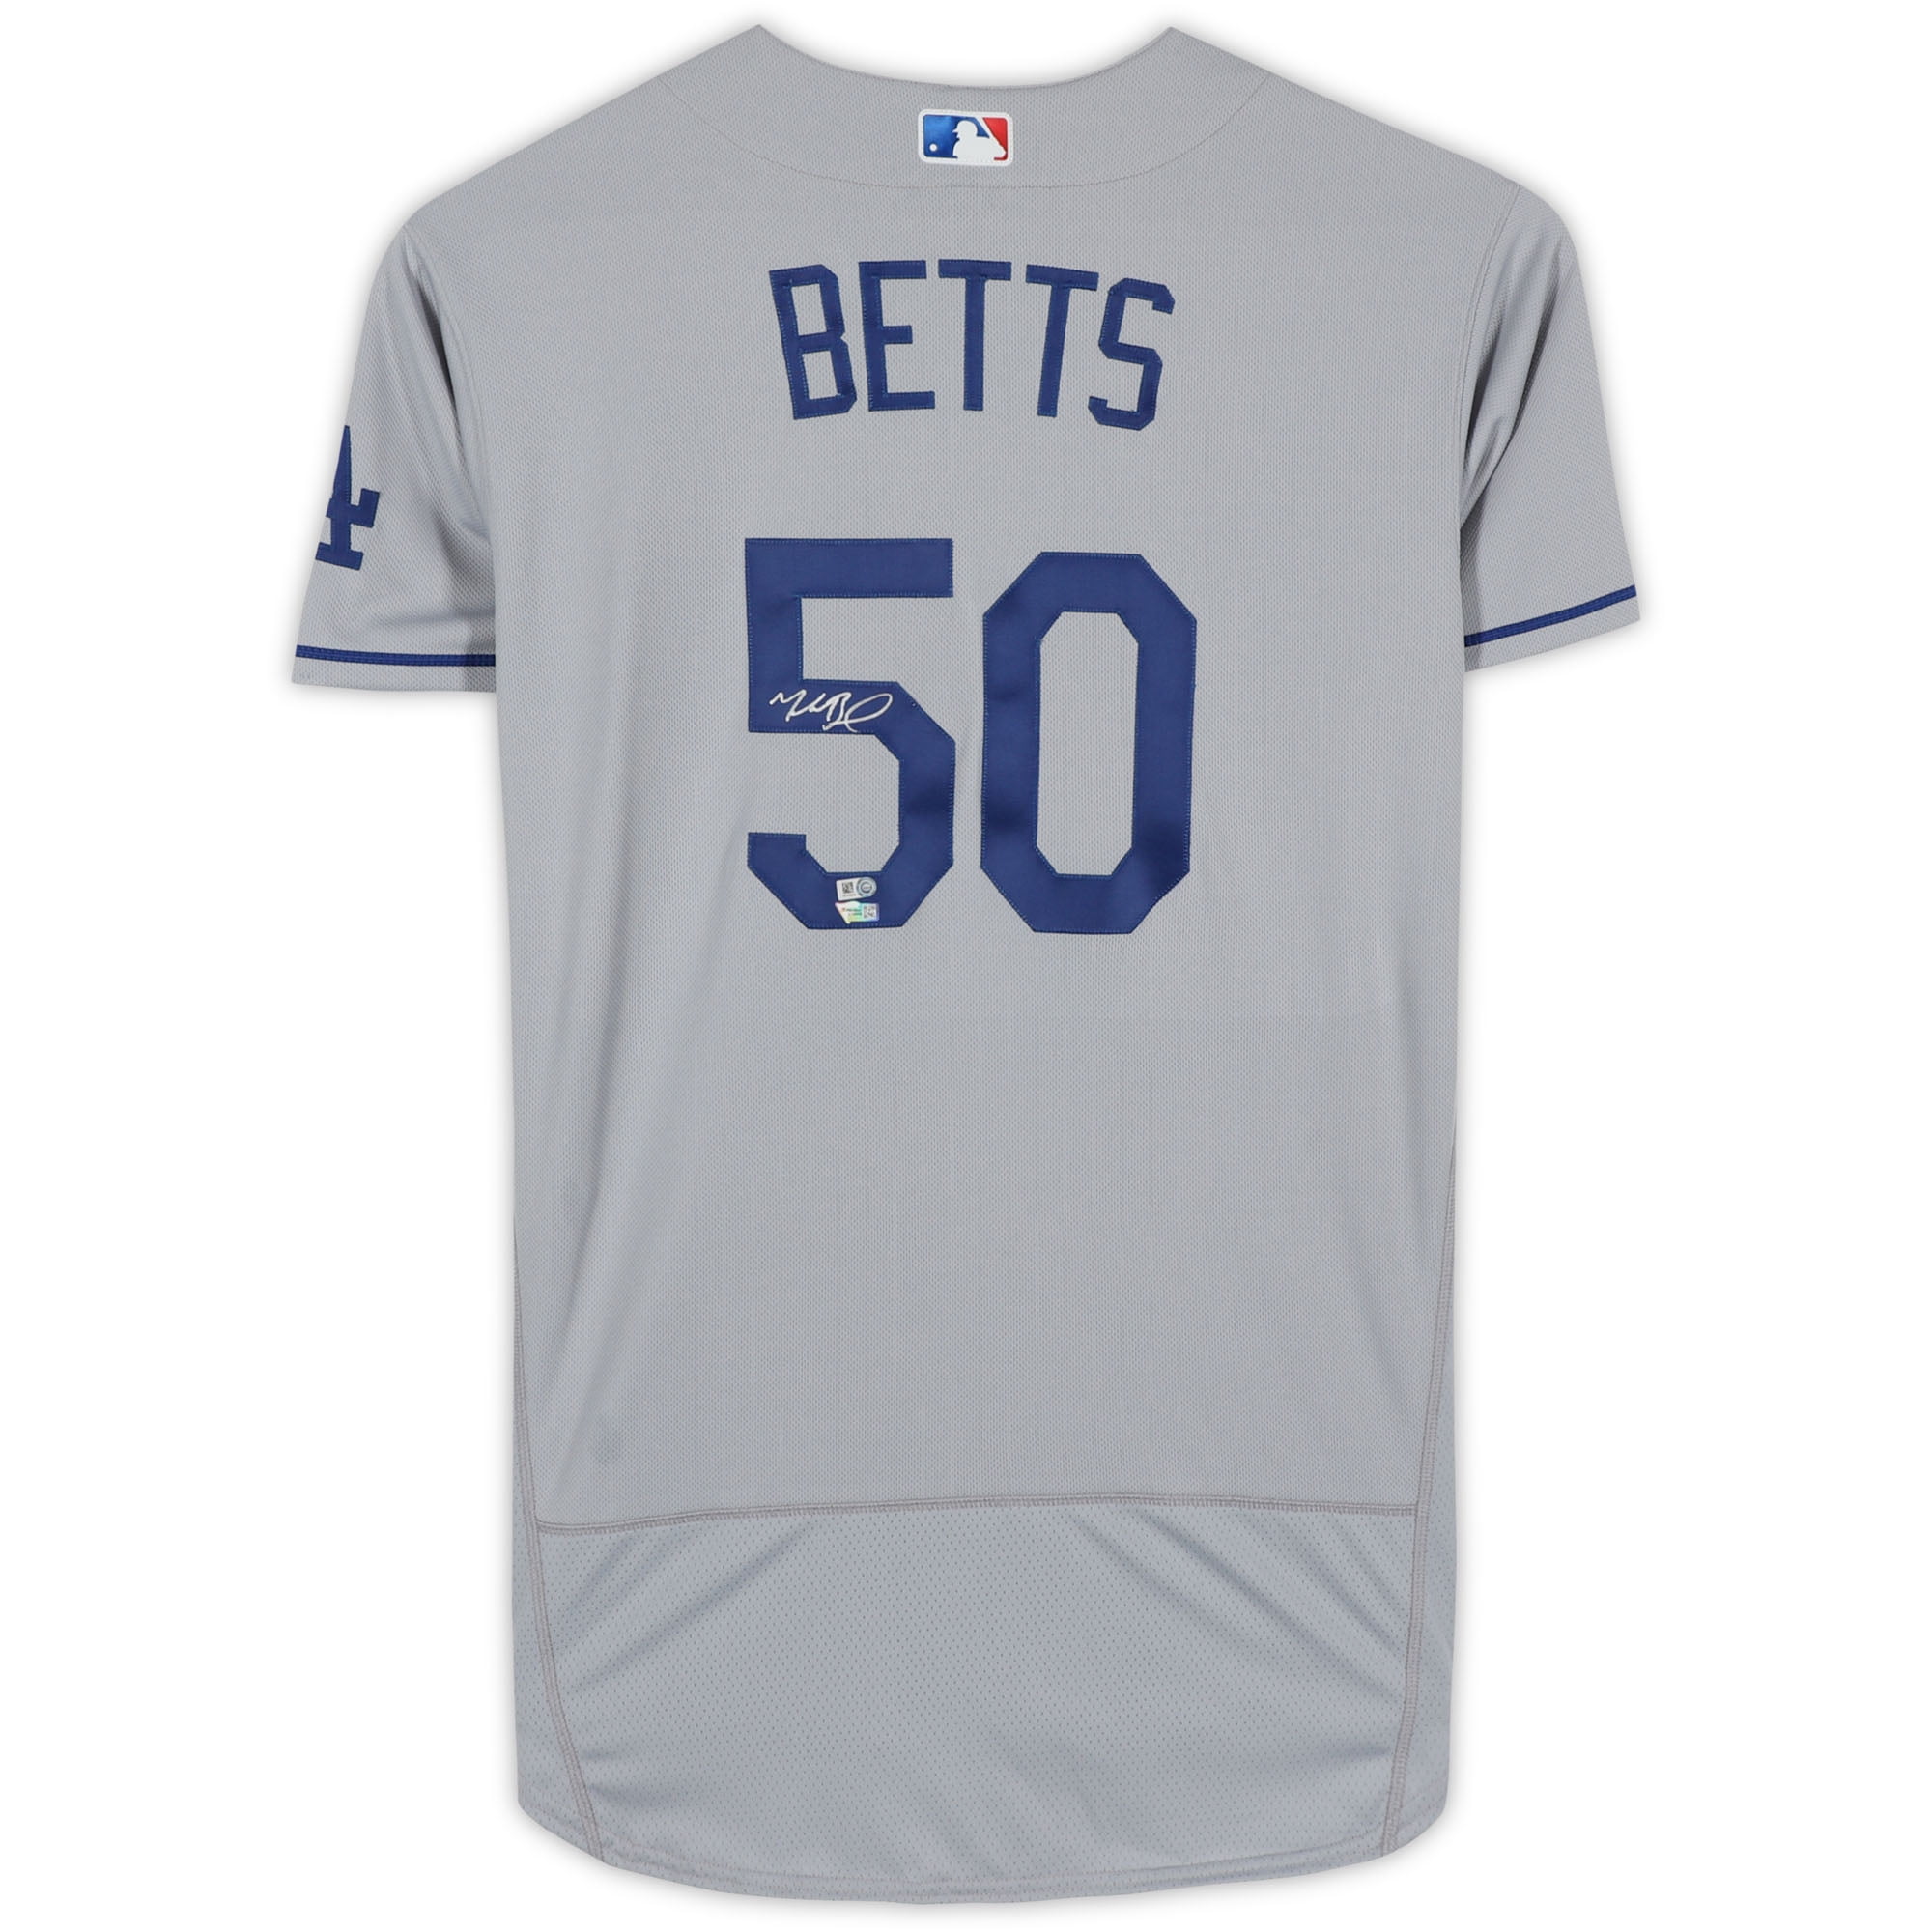 Mookie betts jersey… WITH REAL AUTOGRAPH